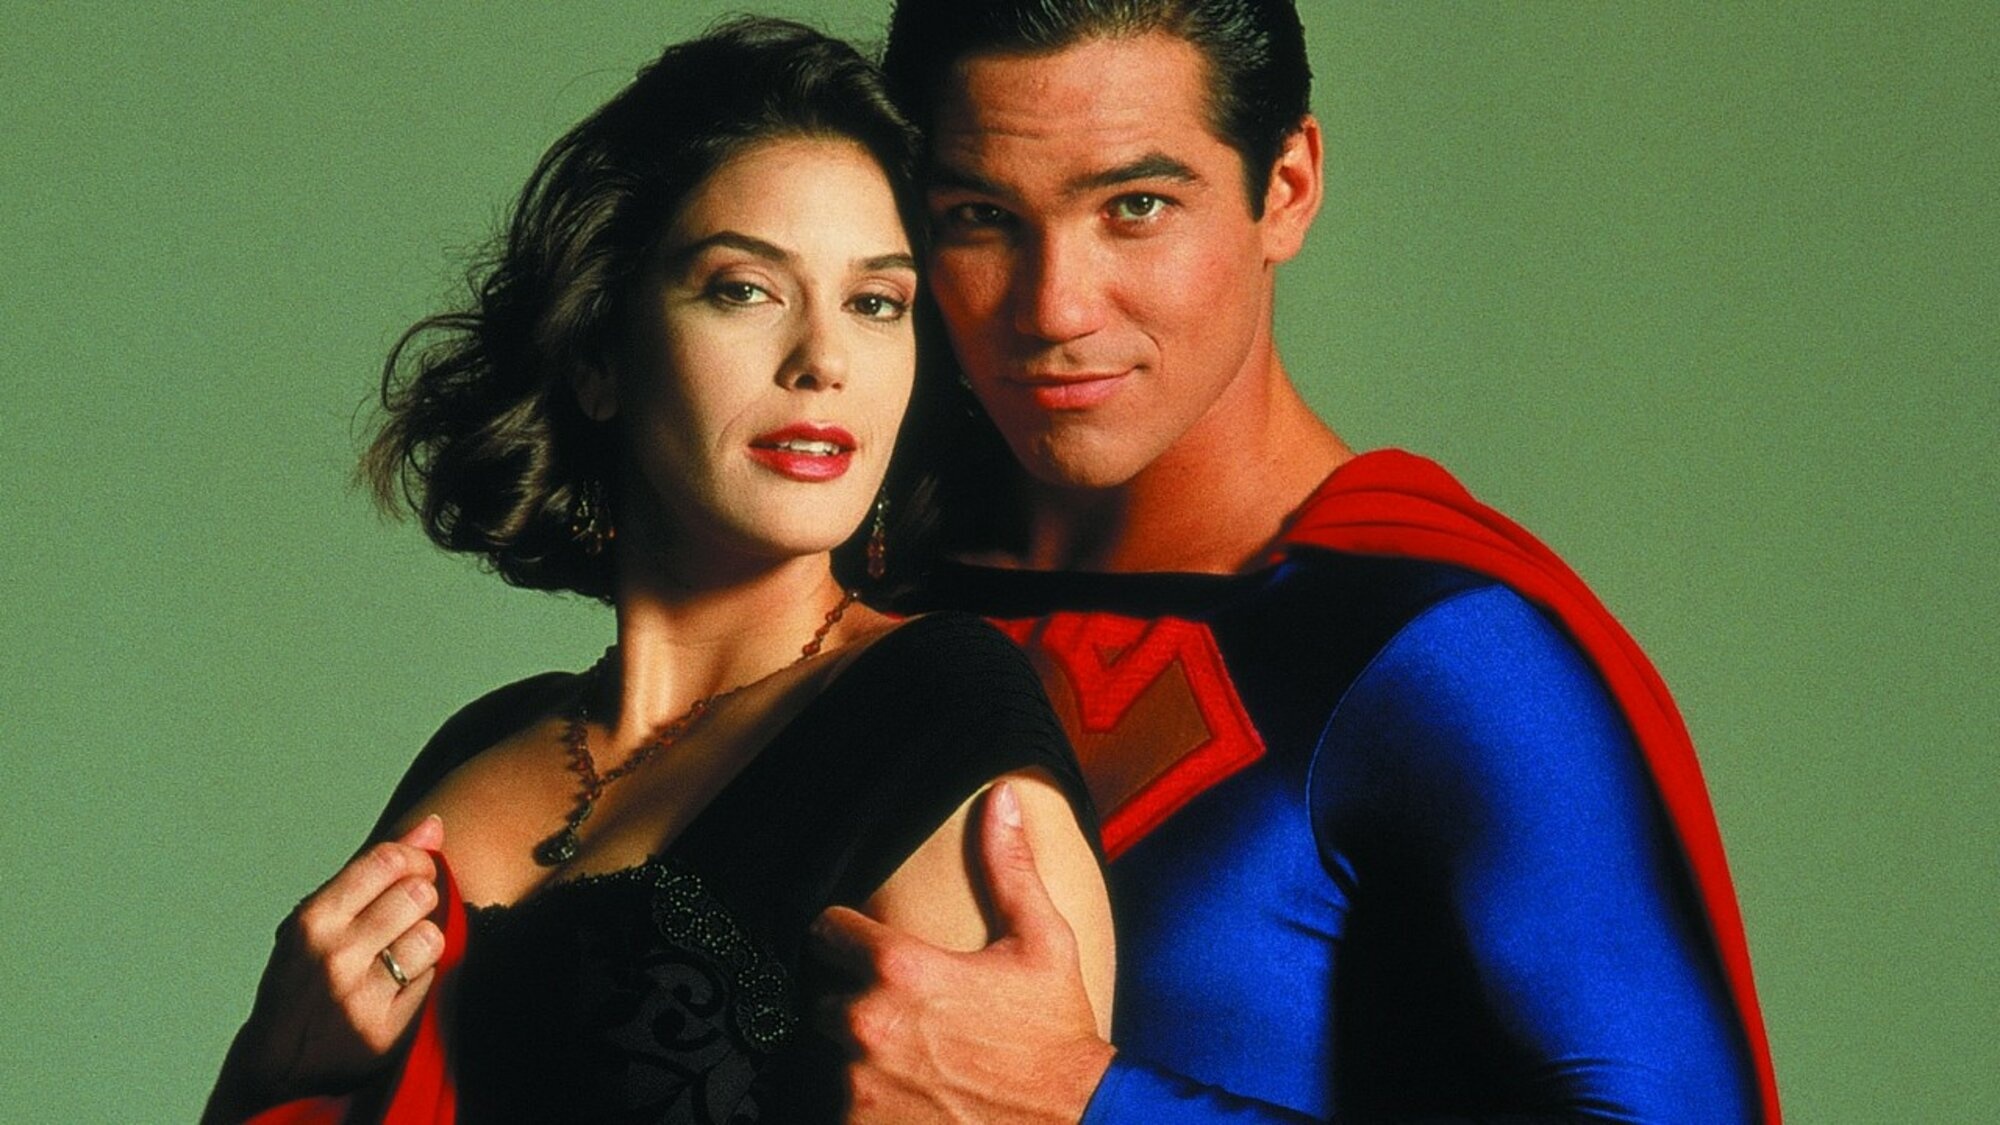 Lois and Clark: The New Adventures of Superman: Dean Cain, The first one to audition for the lead role, and was the first confirmed actor in the main cast. 2000x1130 HD Wallpaper.